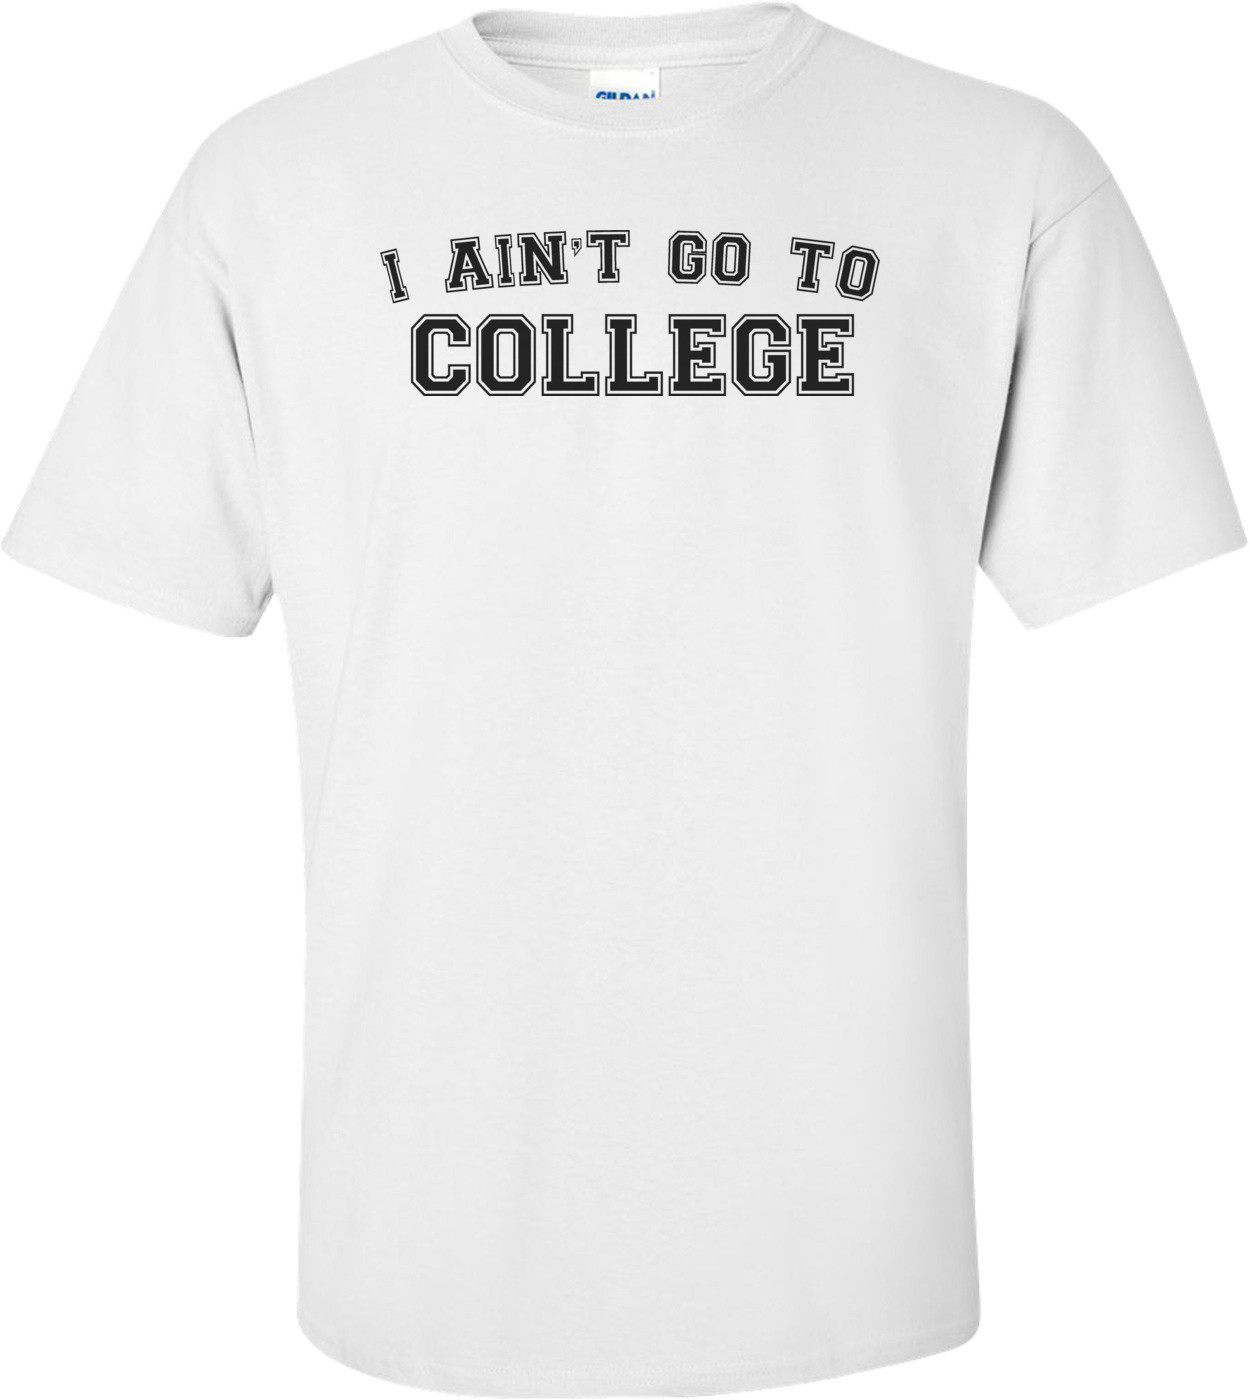 I Ain't Go To College Funny T-shirt